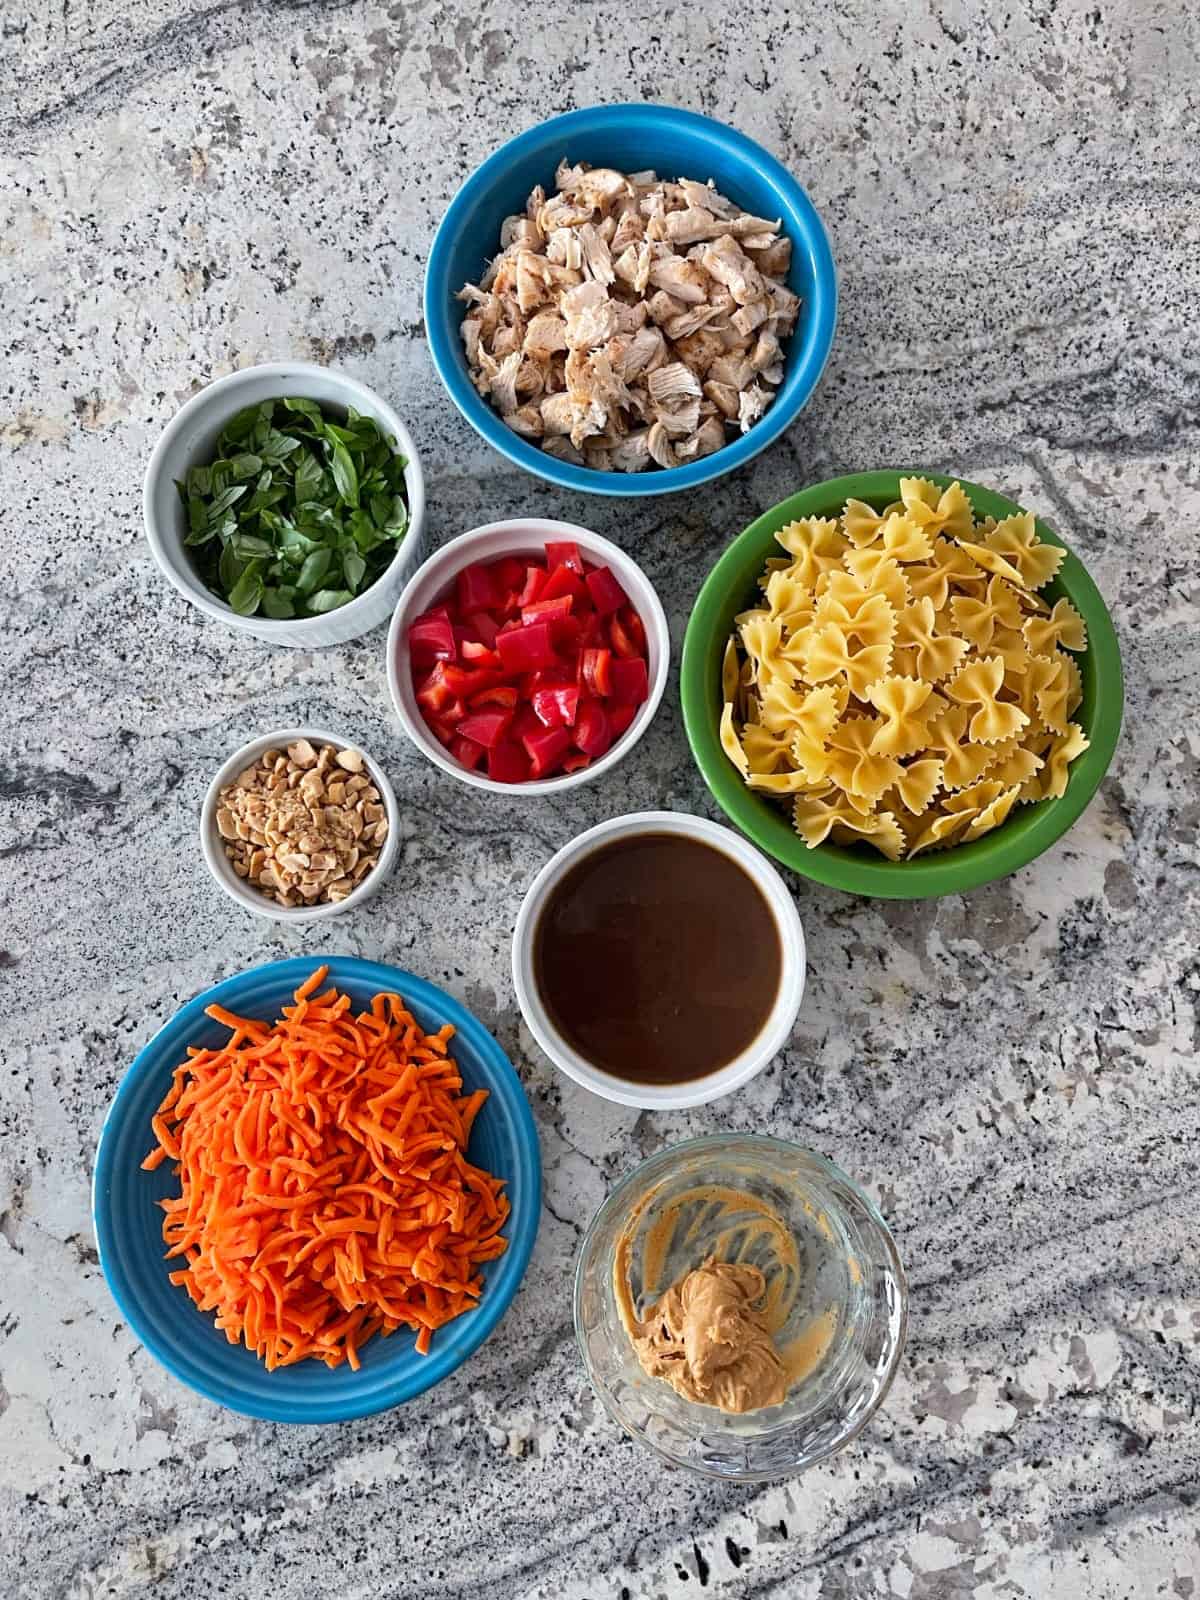 Ingredients including diced chicken breast, chopped basil, dry pasta, chopped red pepper, peanuts, shredded carrots and peanut dressing.